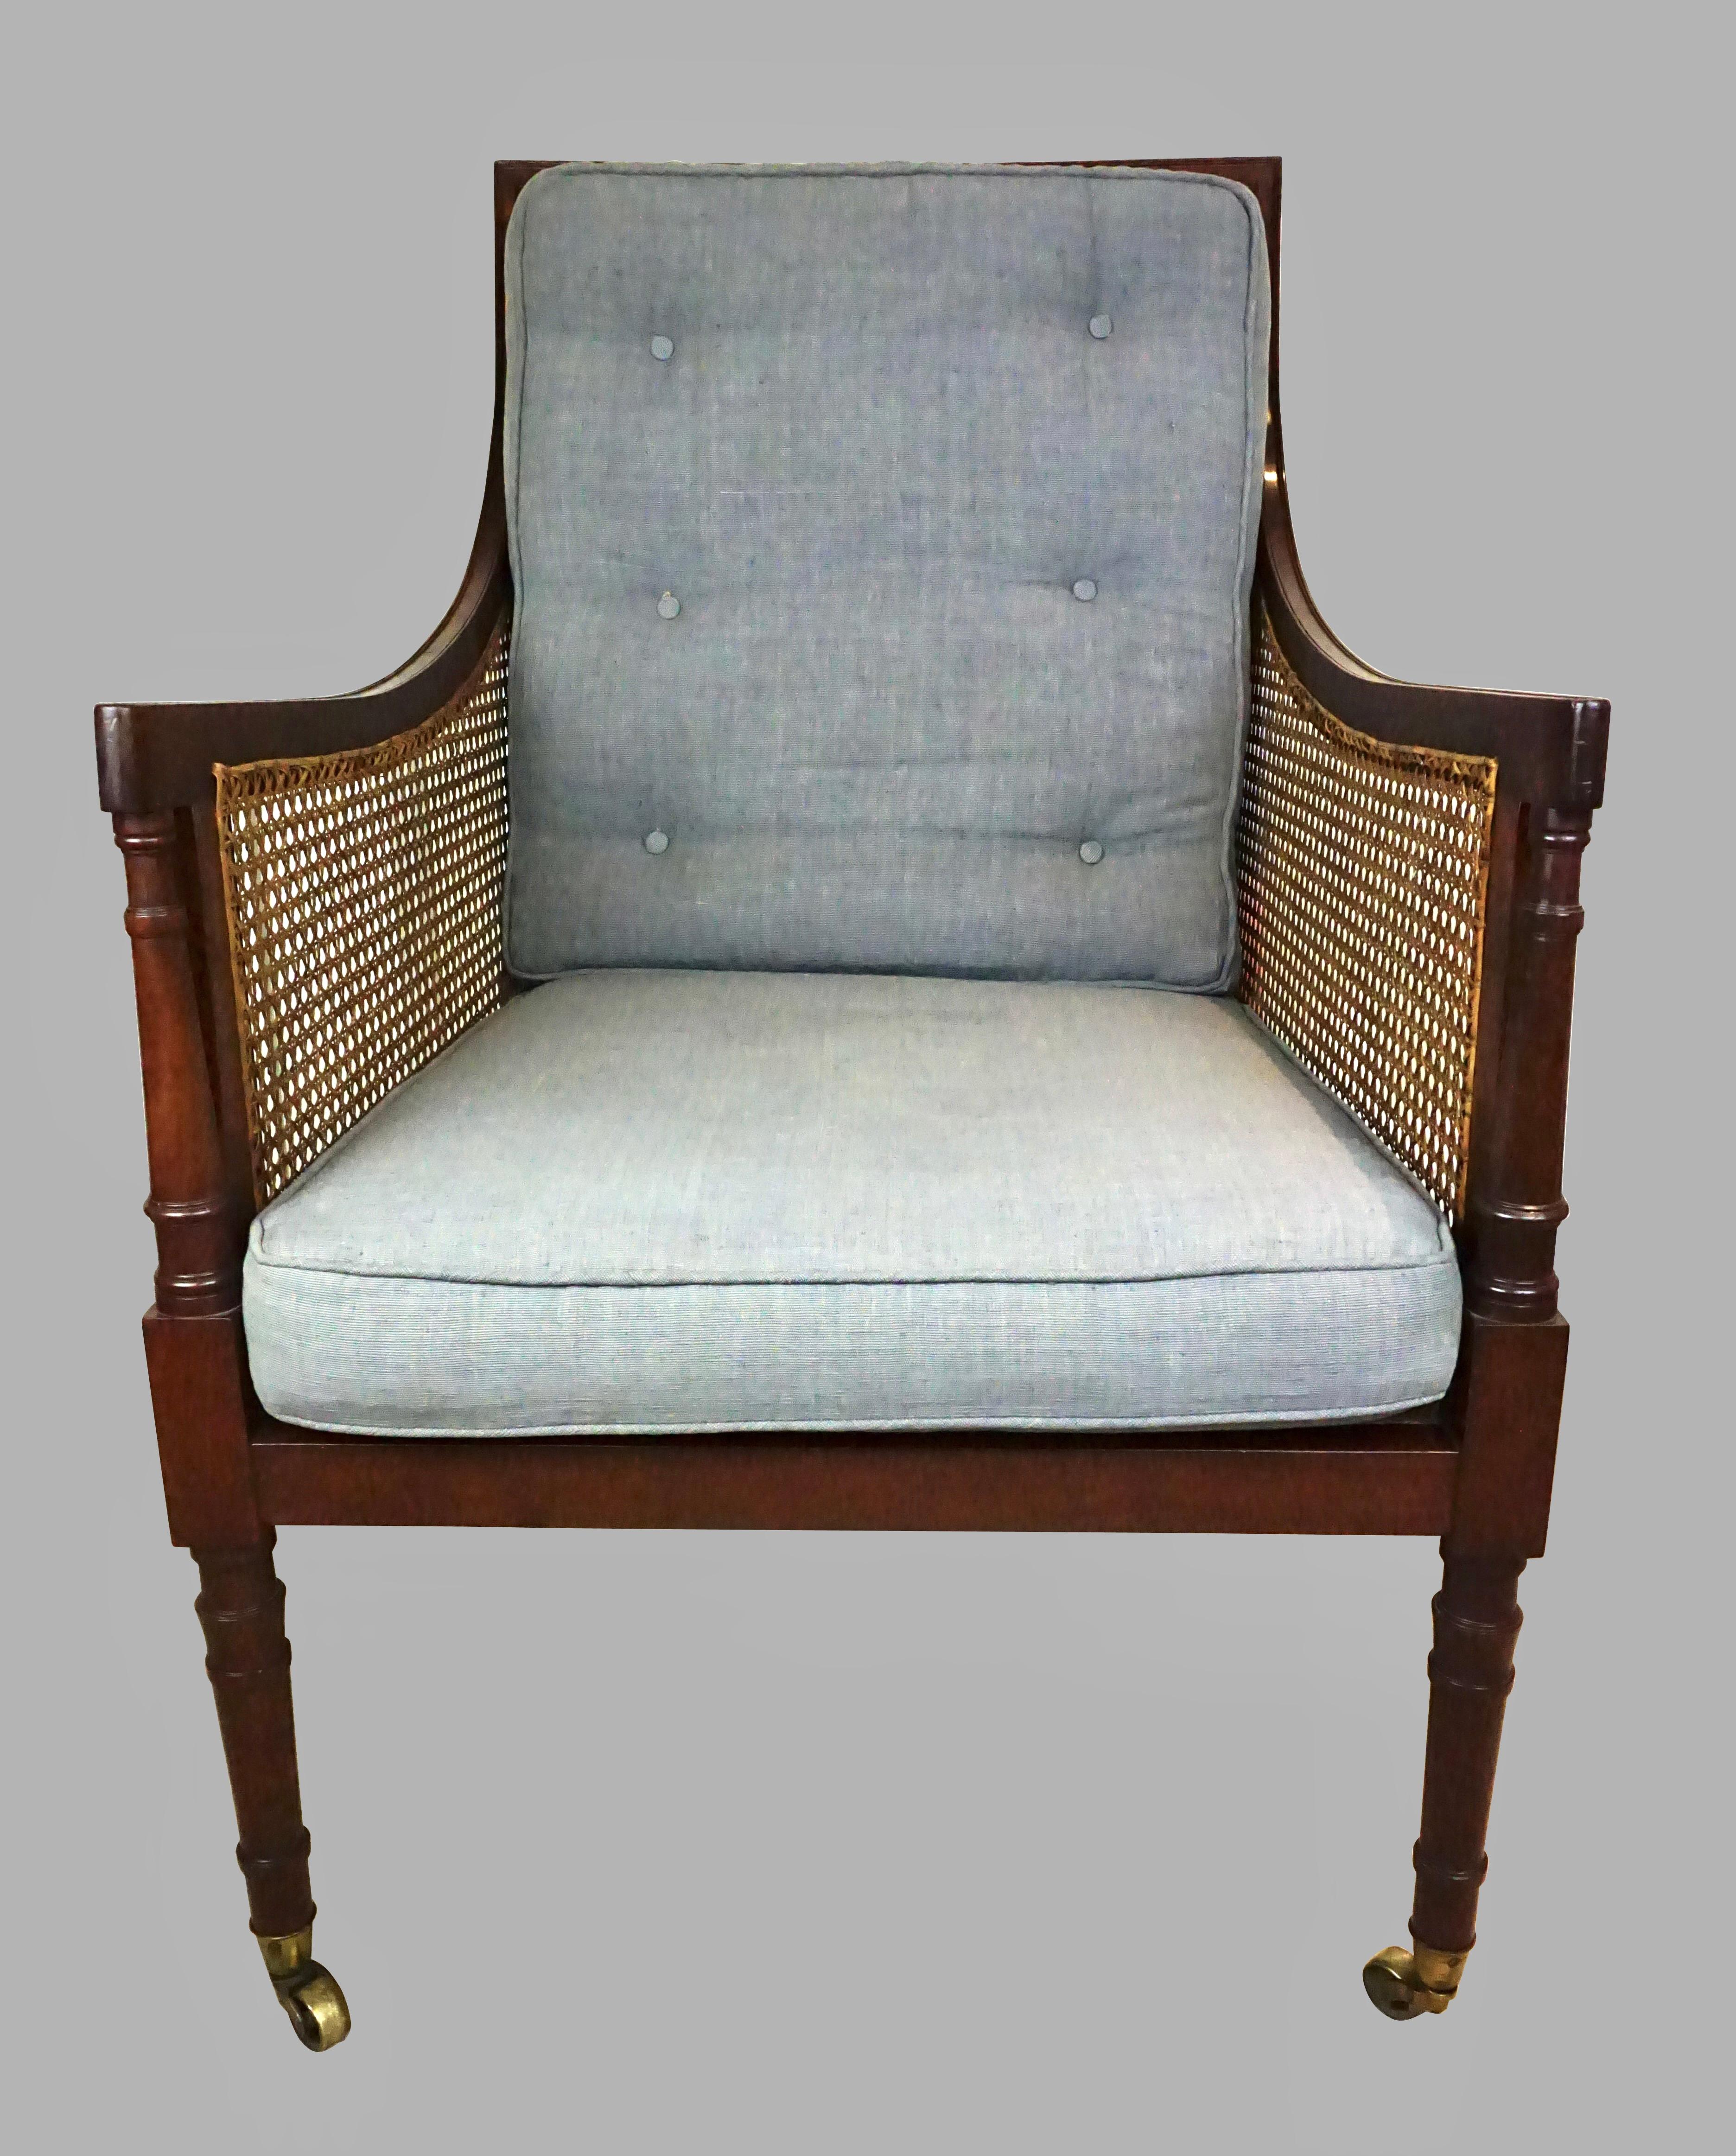 A large scale English Regency style mahogany library bergere armchair, caned on the front, sides and back, with removable bluish gray linen seat and back cushions, raised on turned front legs terminating in brass casters. This chair sits very well